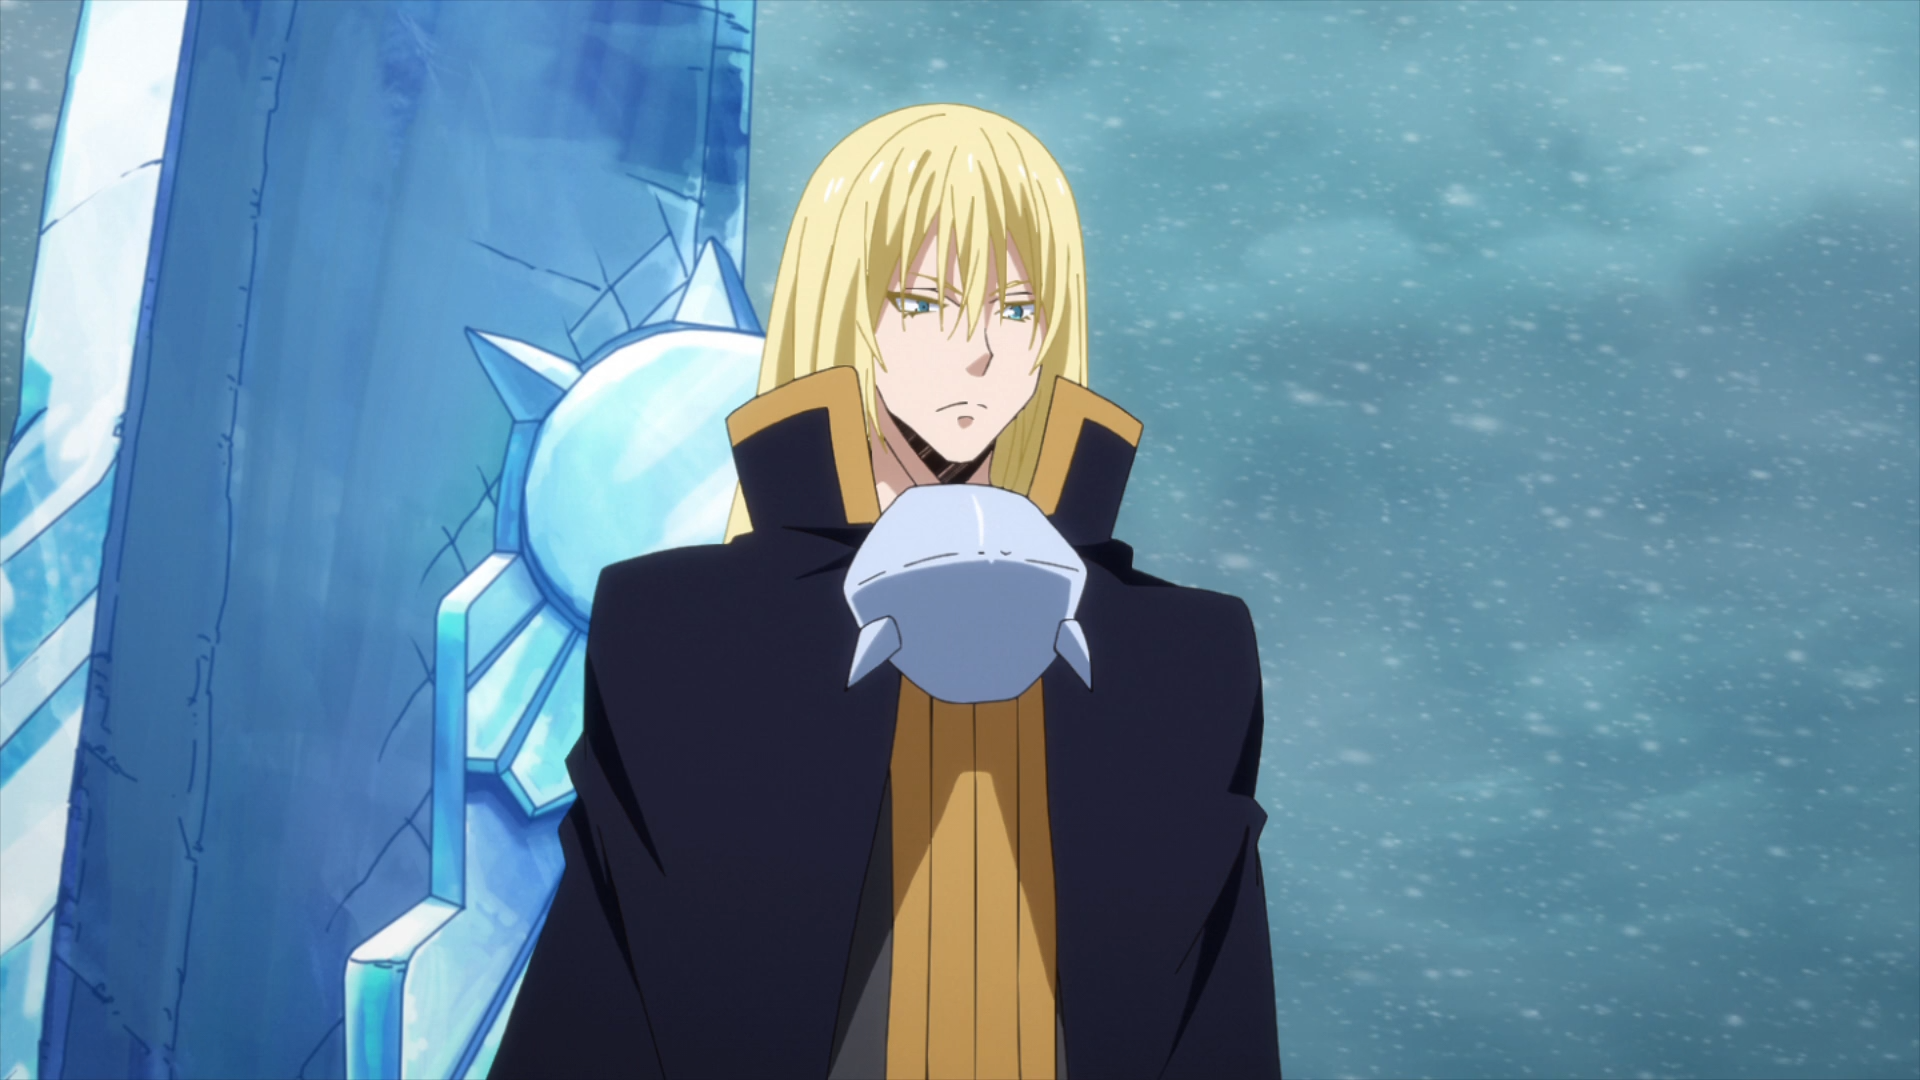 That Time I Got Reincarnated as a Slime episode 42 release date